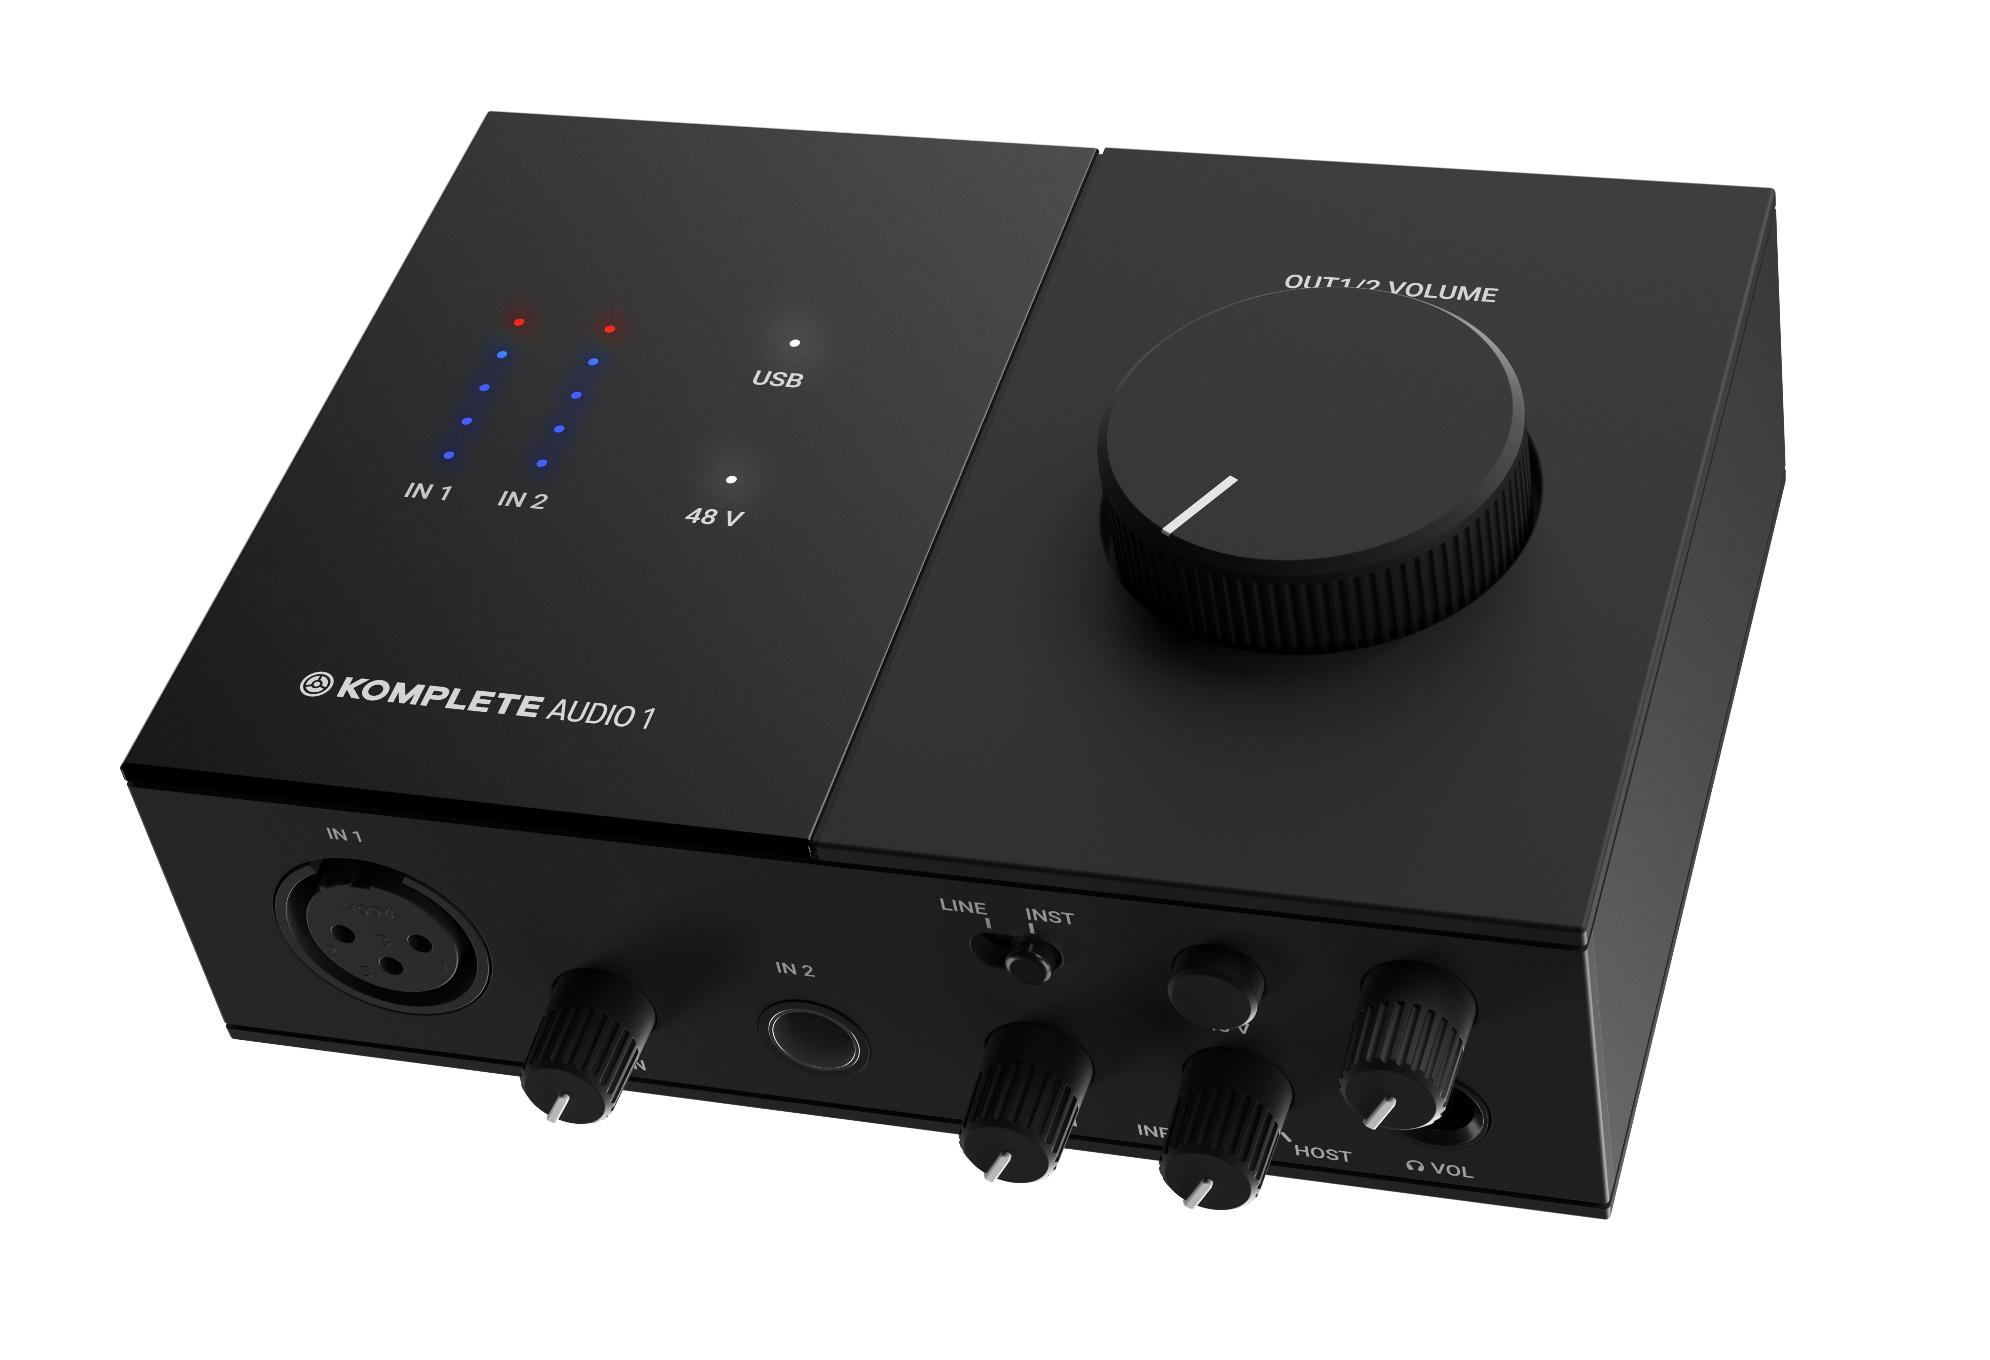 Native Instruments Komplete Audio 1 192 KHz Bit USB Recording Interface With XLR Input 1 Line Input 2 RCA Outputs | Full Compass Systems